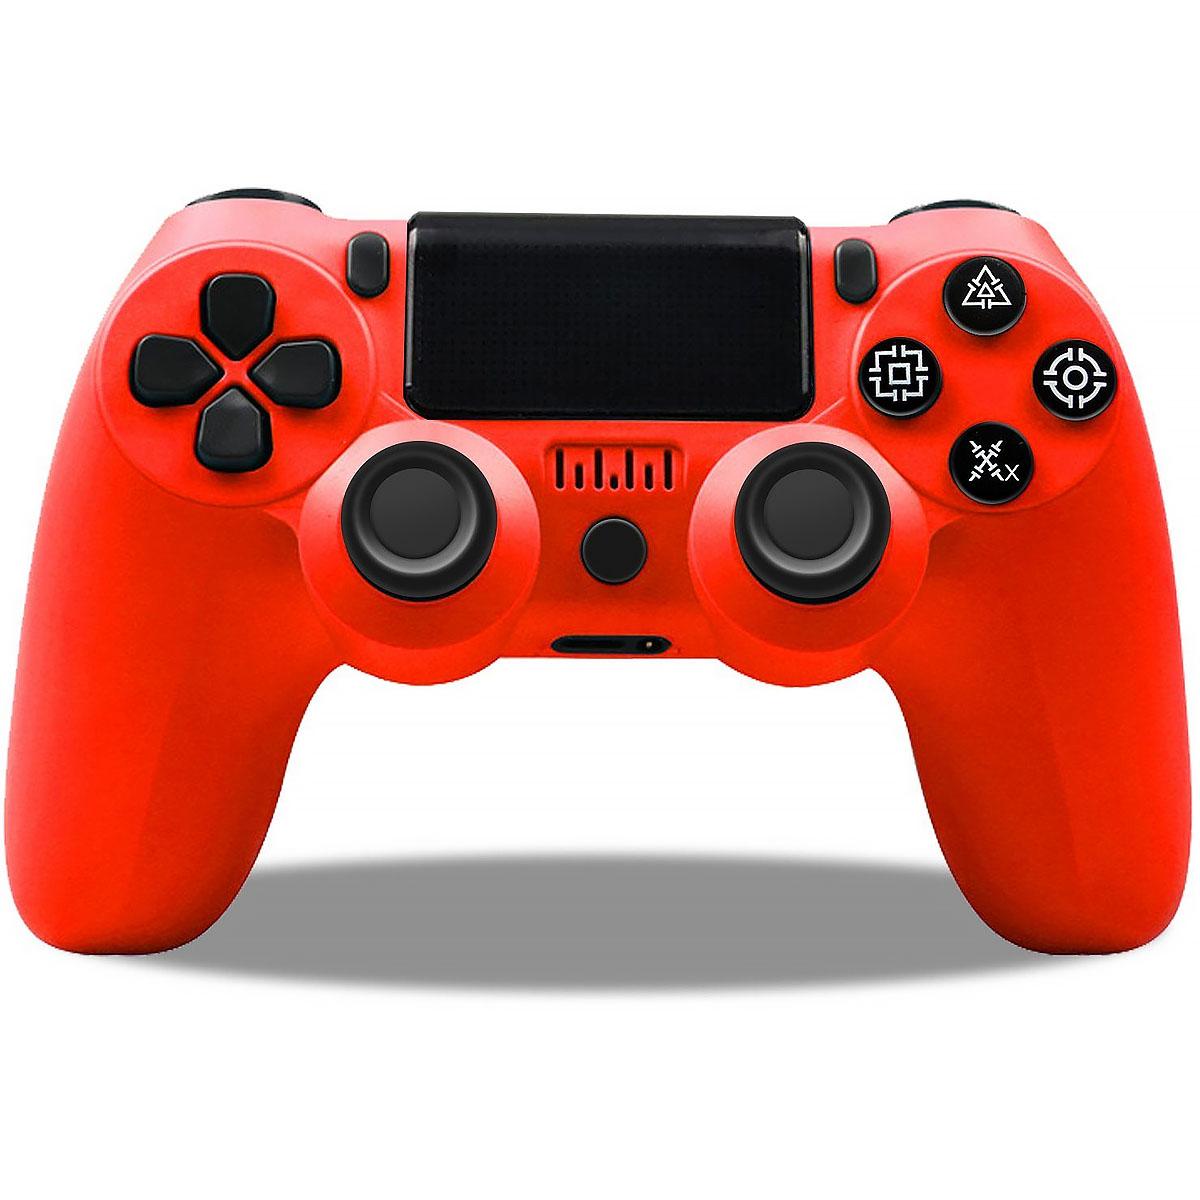 RESPIEL Gamepad, Bluetooth PC/PS3/PS4 Controller Controller, Wireless rot für Gamepad, Rotes